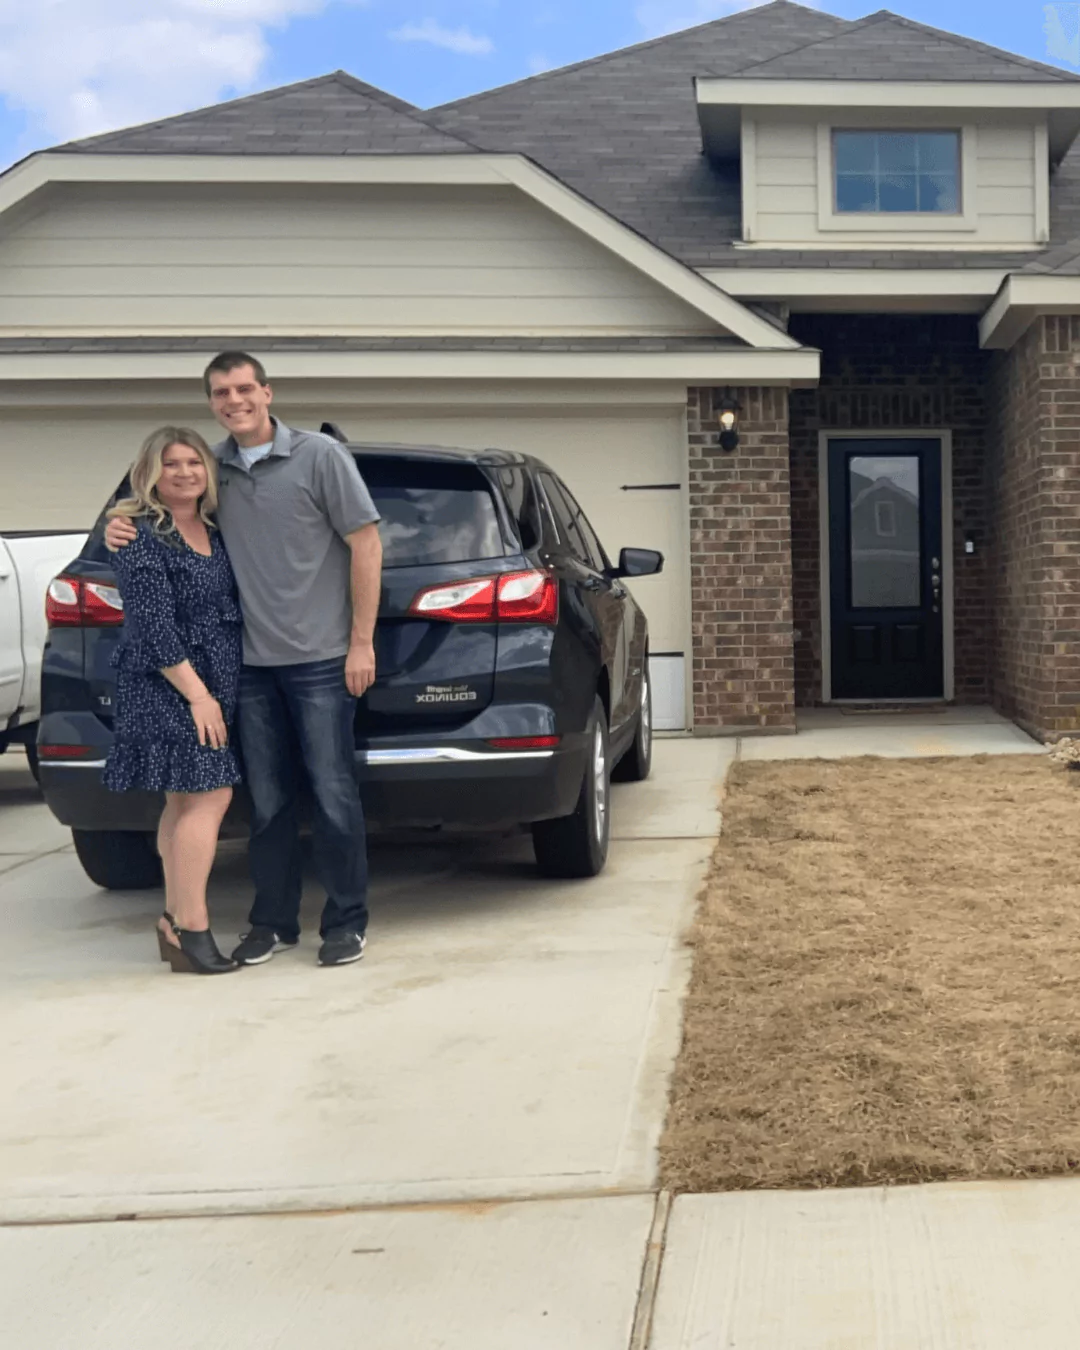 Our LGI Homes 2021 Tract Home Buying Experience